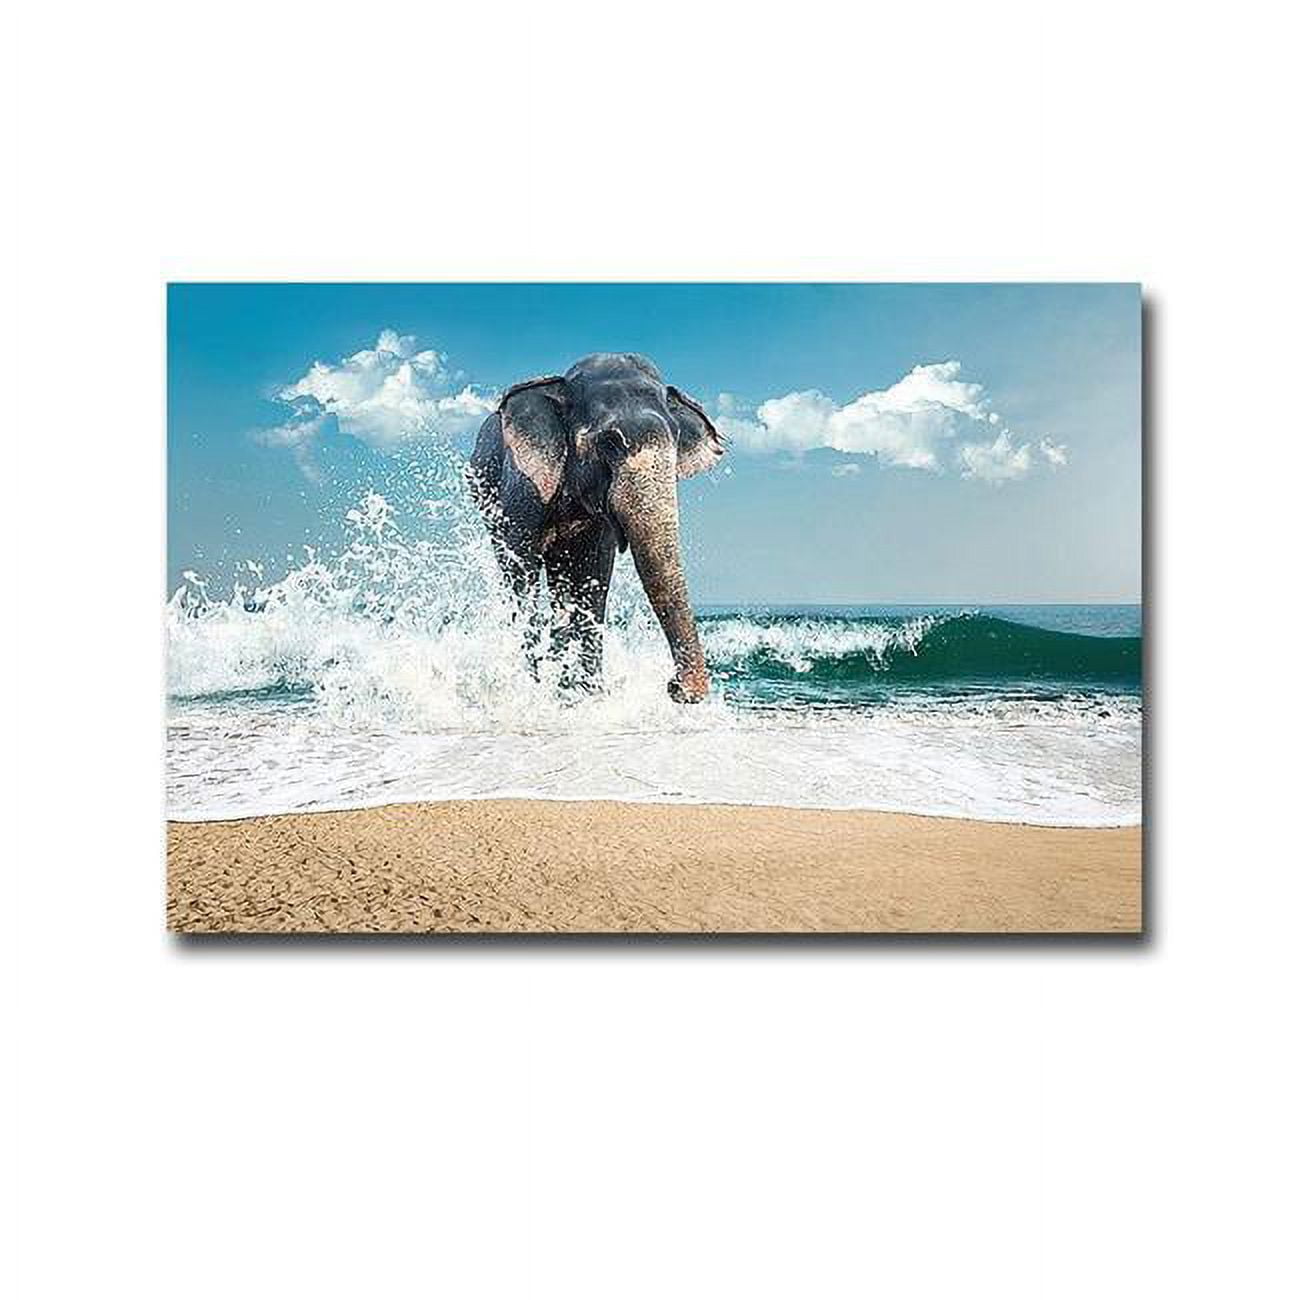 Elephant By Photoinc Studio Premium Gallery-wrapped Canvas Giclee Art - Ready-to-hang, 16 X 24 In.